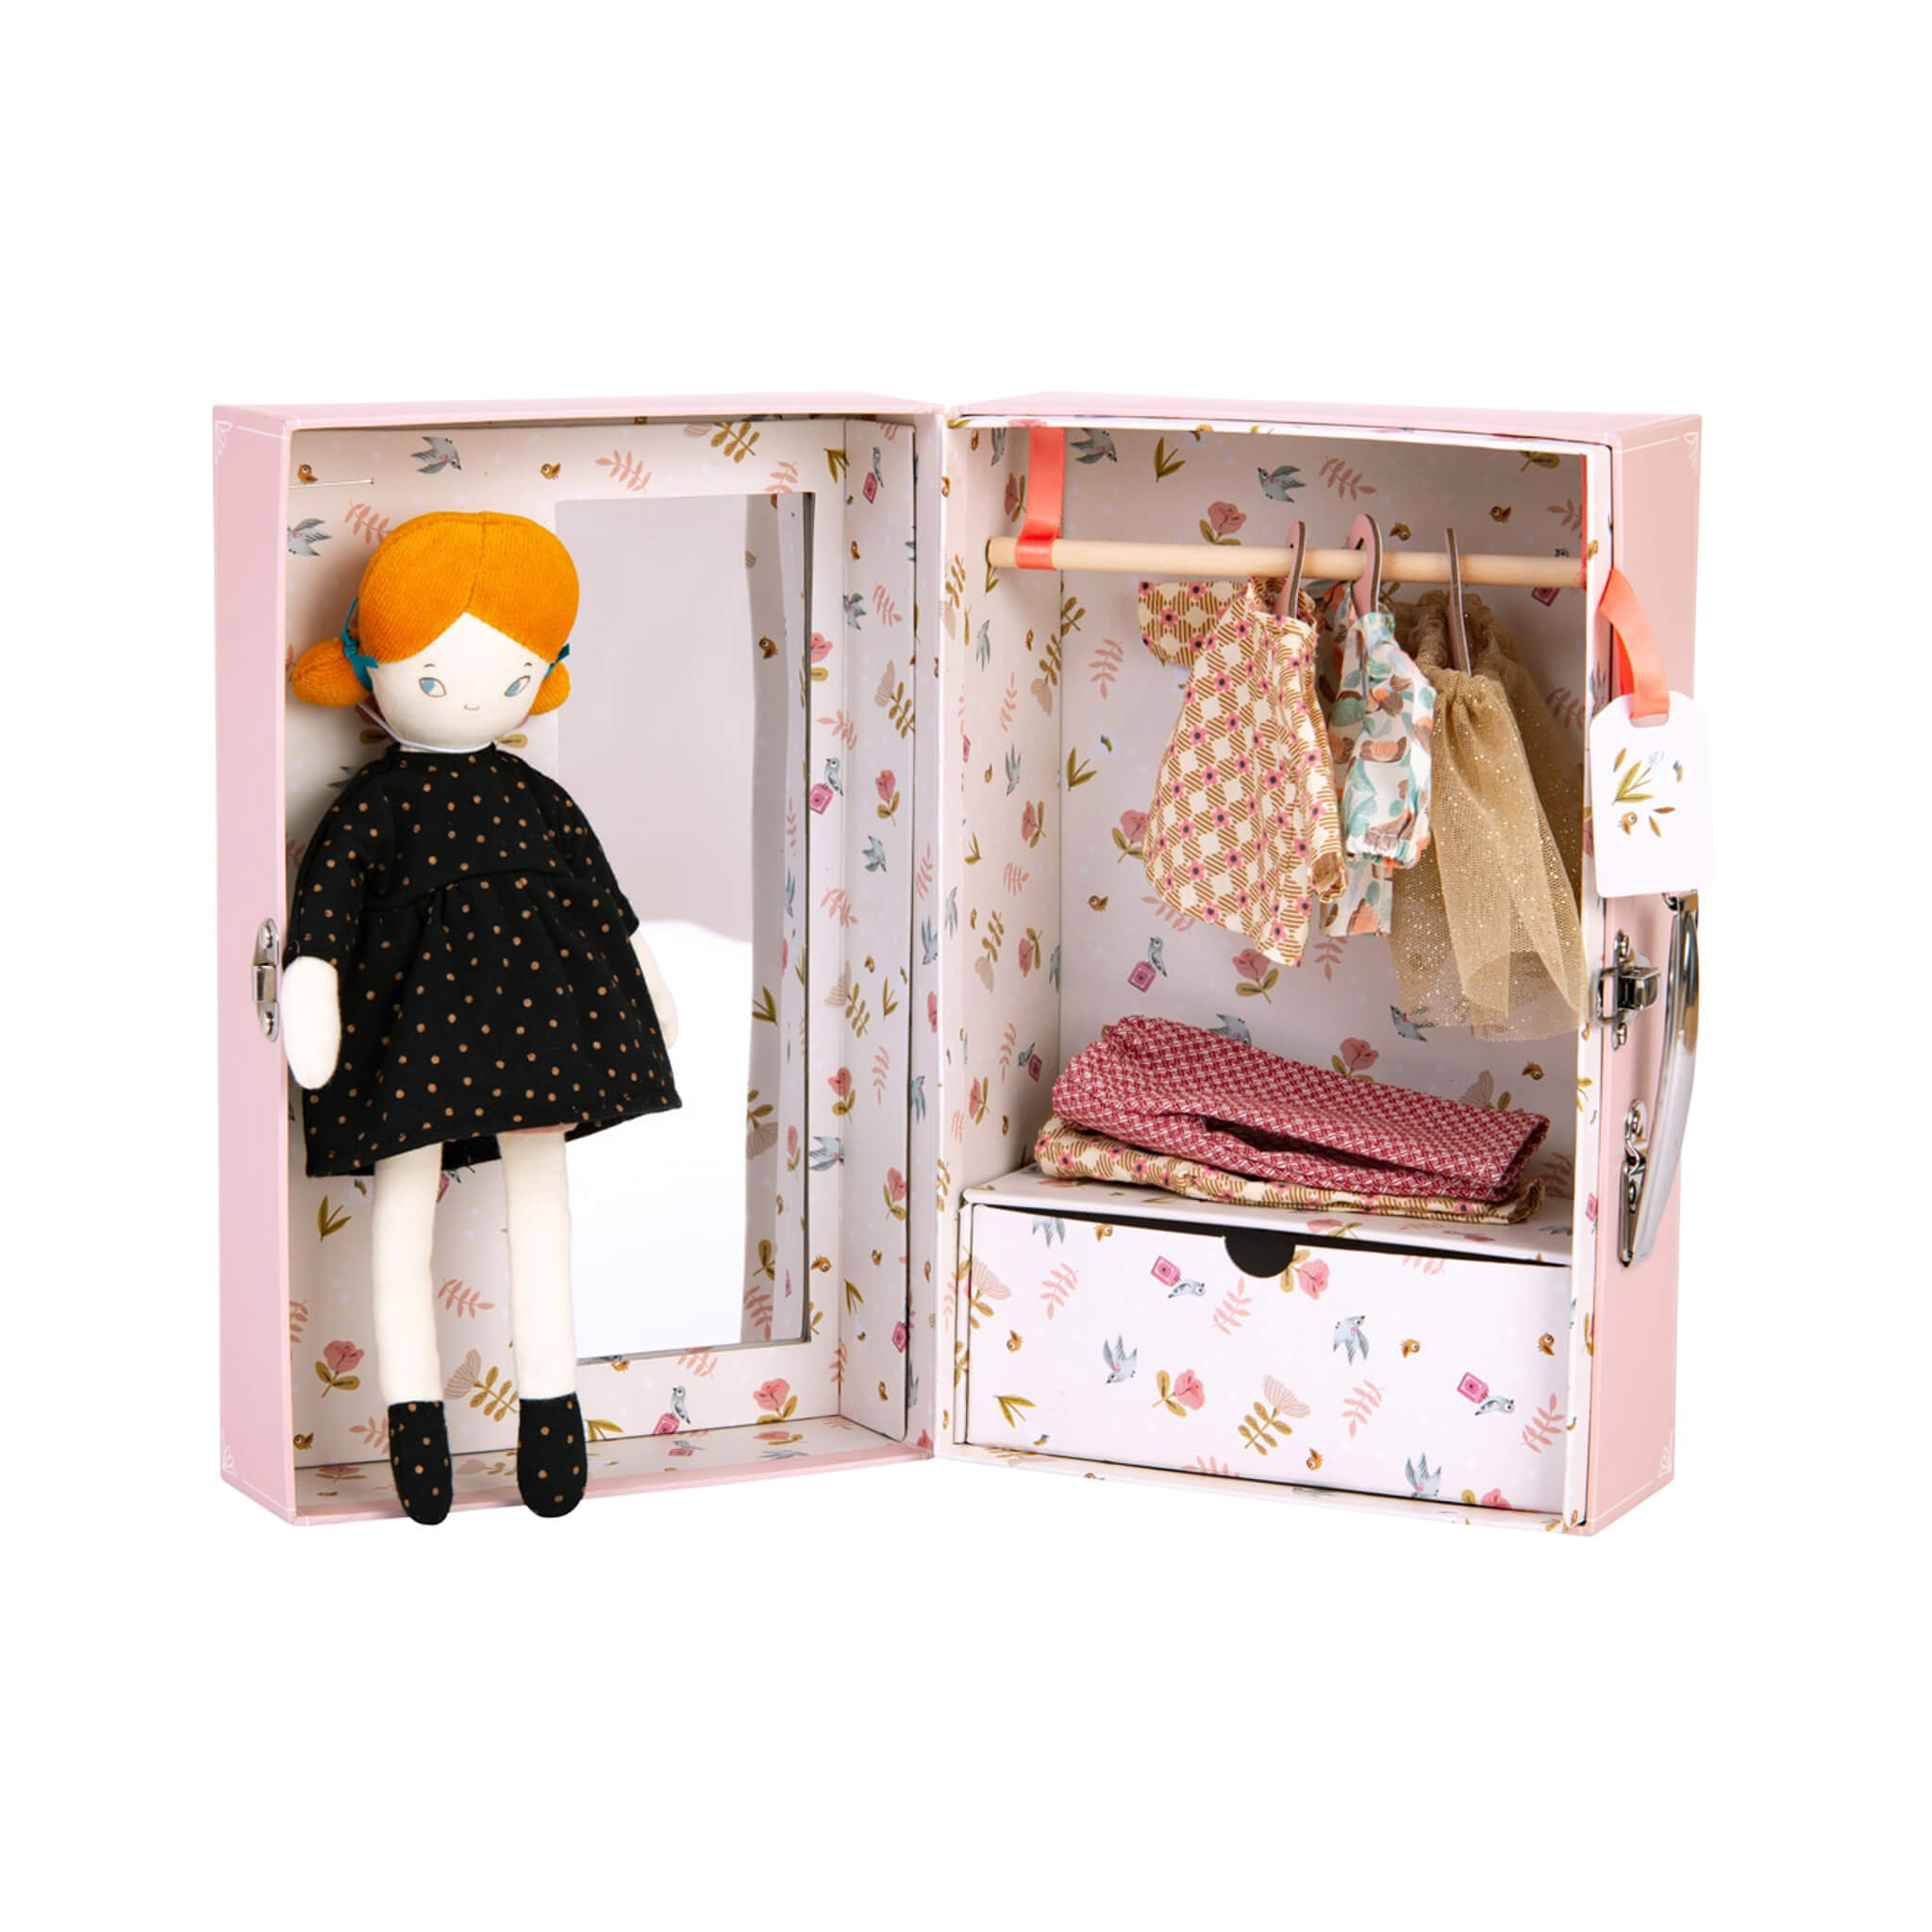 Moulin Roty Little Wadrobe Suitcase